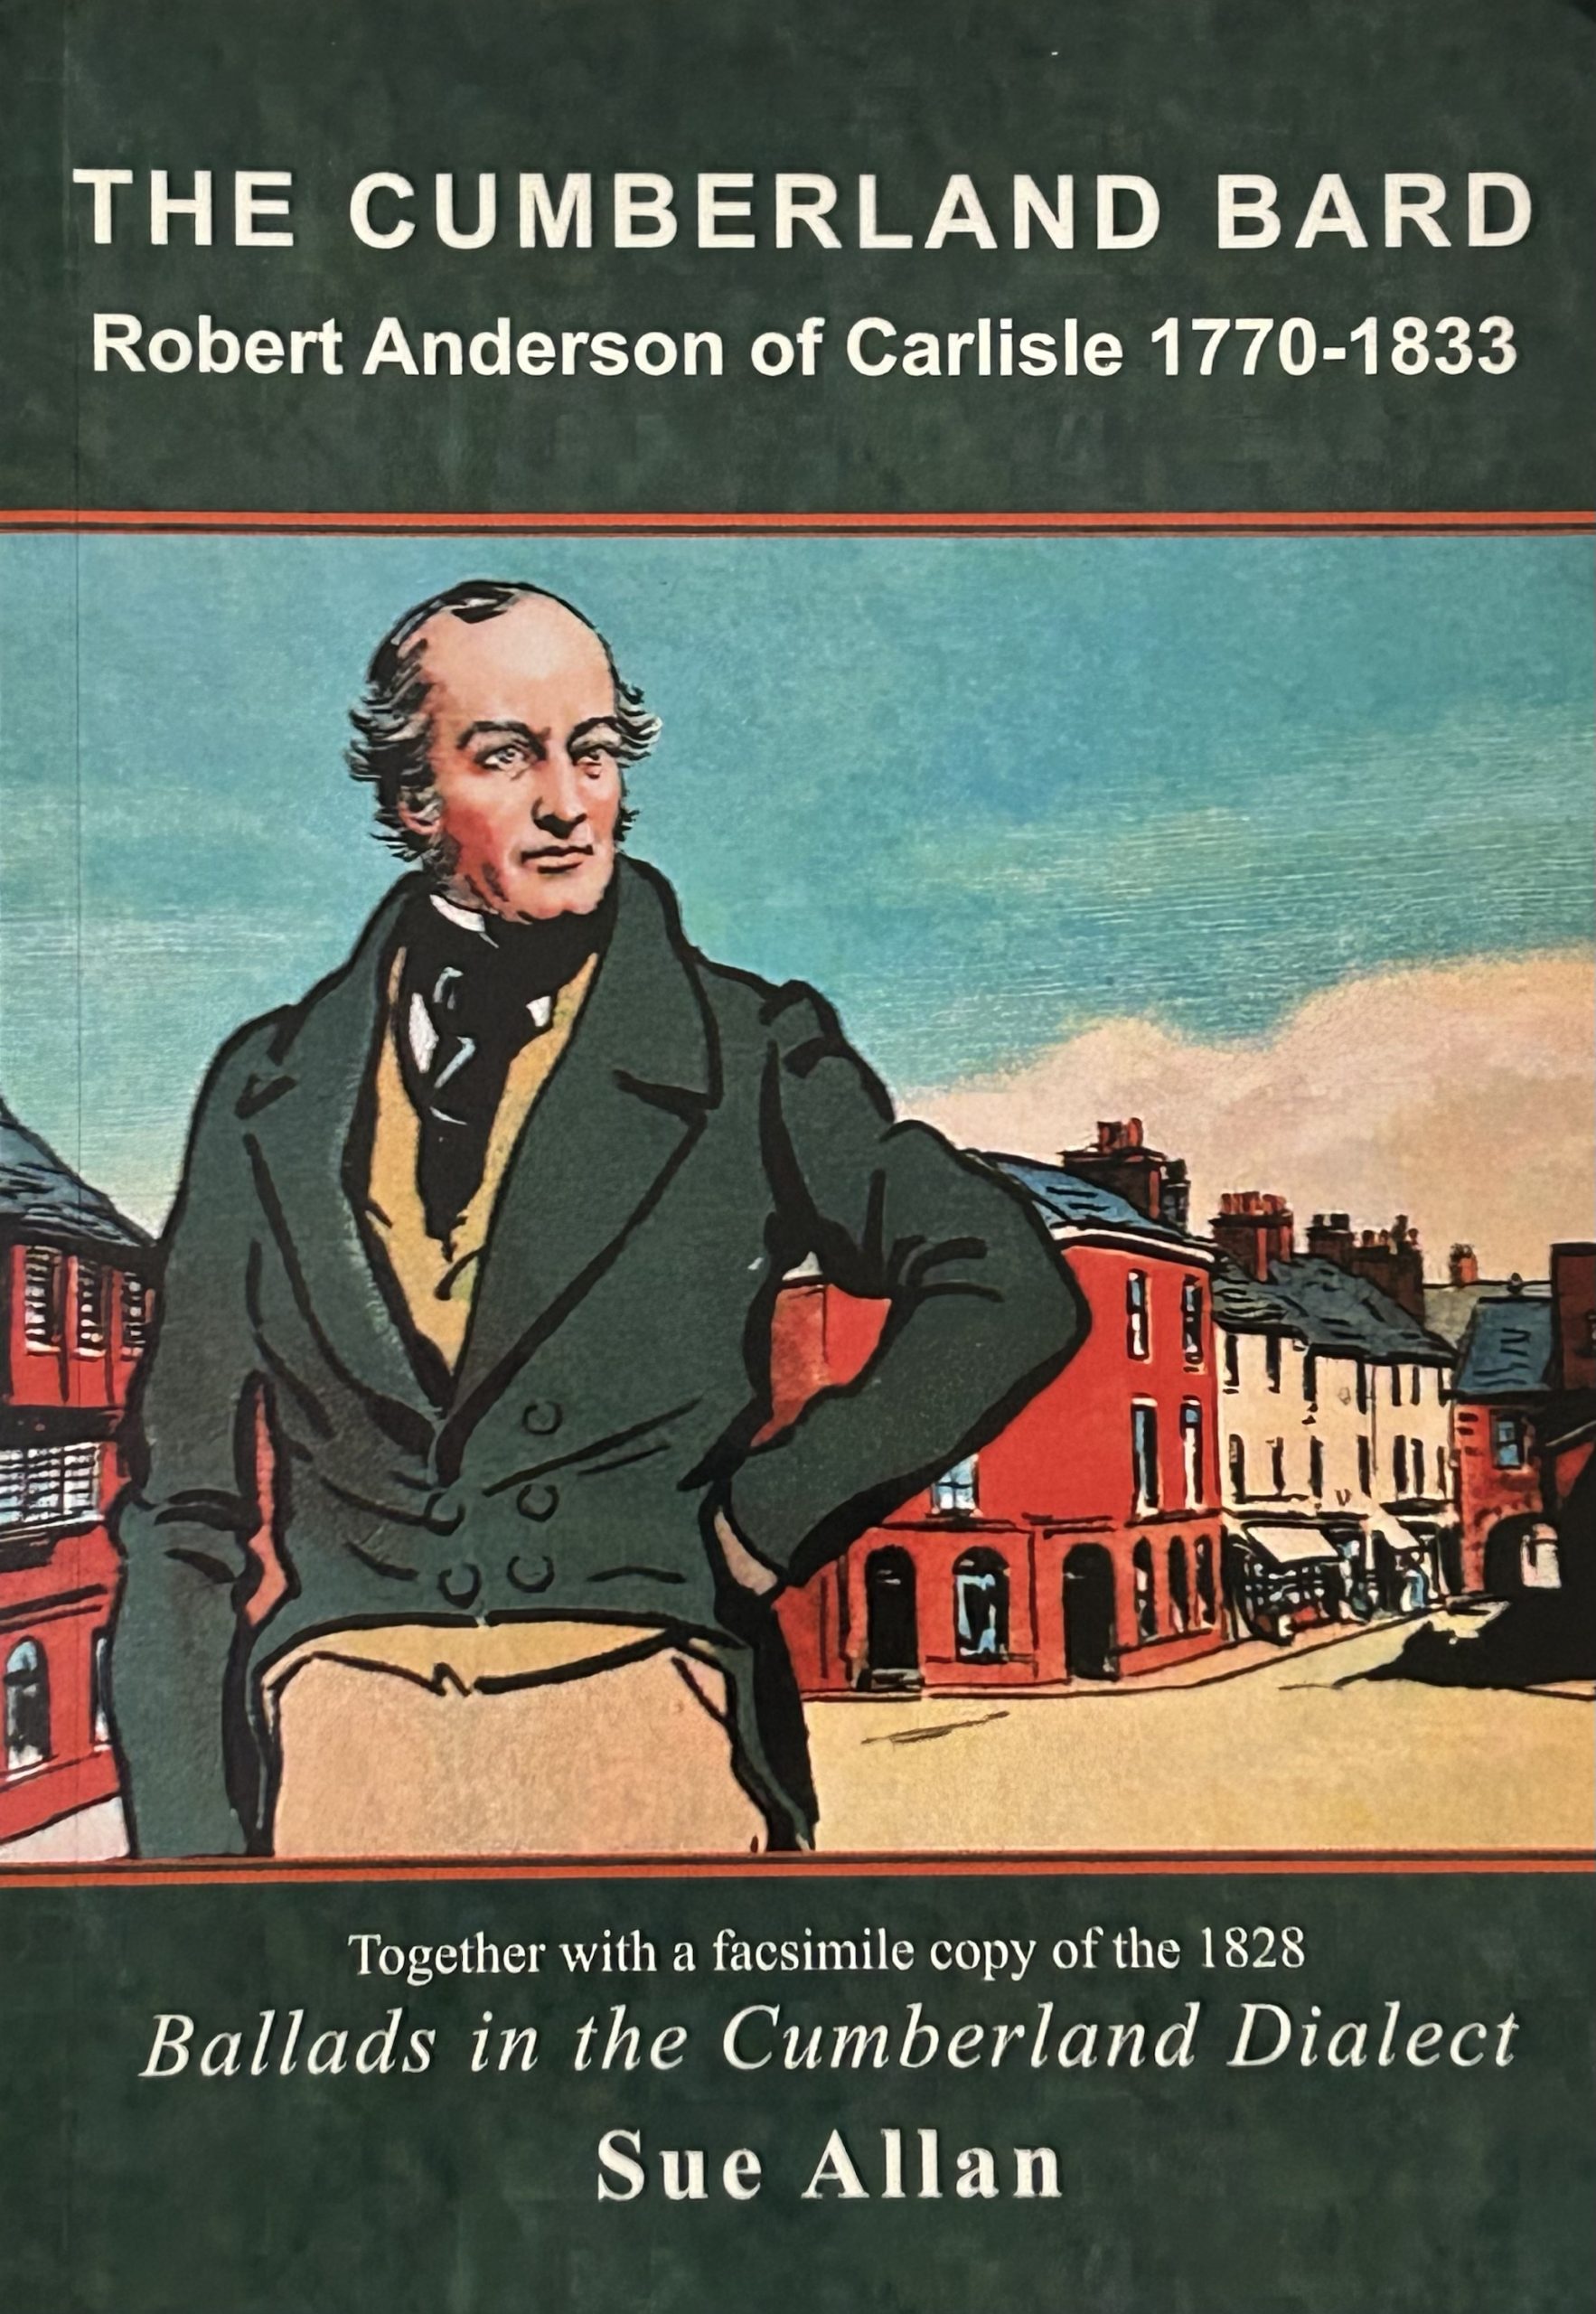 "The Cumberland Bard: Robert Anderson of Carlisle 1770-1833" is a biography written by Sue Allan, detailing the life and works of Robert Anderson, a poet from Carlisle, England. Born in 1770, Anderson was known for his literary contributions, particularly his poetry, which often focused on rural life and the landscape of Cumberland. Sue Allan's biography likely delves into Anderson's upbringing, influences, and the historical context of his works. It might explore his impact on the literary scene of his time, as well as his personal struggles and achievements. Anderson's poetry often celebrated the natural beauty of Cumberland and reflected the everyday lives of its people, making him an important figure in regional literature. Through "The Cumberland Bard," readers can gain insight into Anderson's poetic style, themes, and contributions to English literature, as well as his significance within the cultural and historical landscape of the Cumberland region.